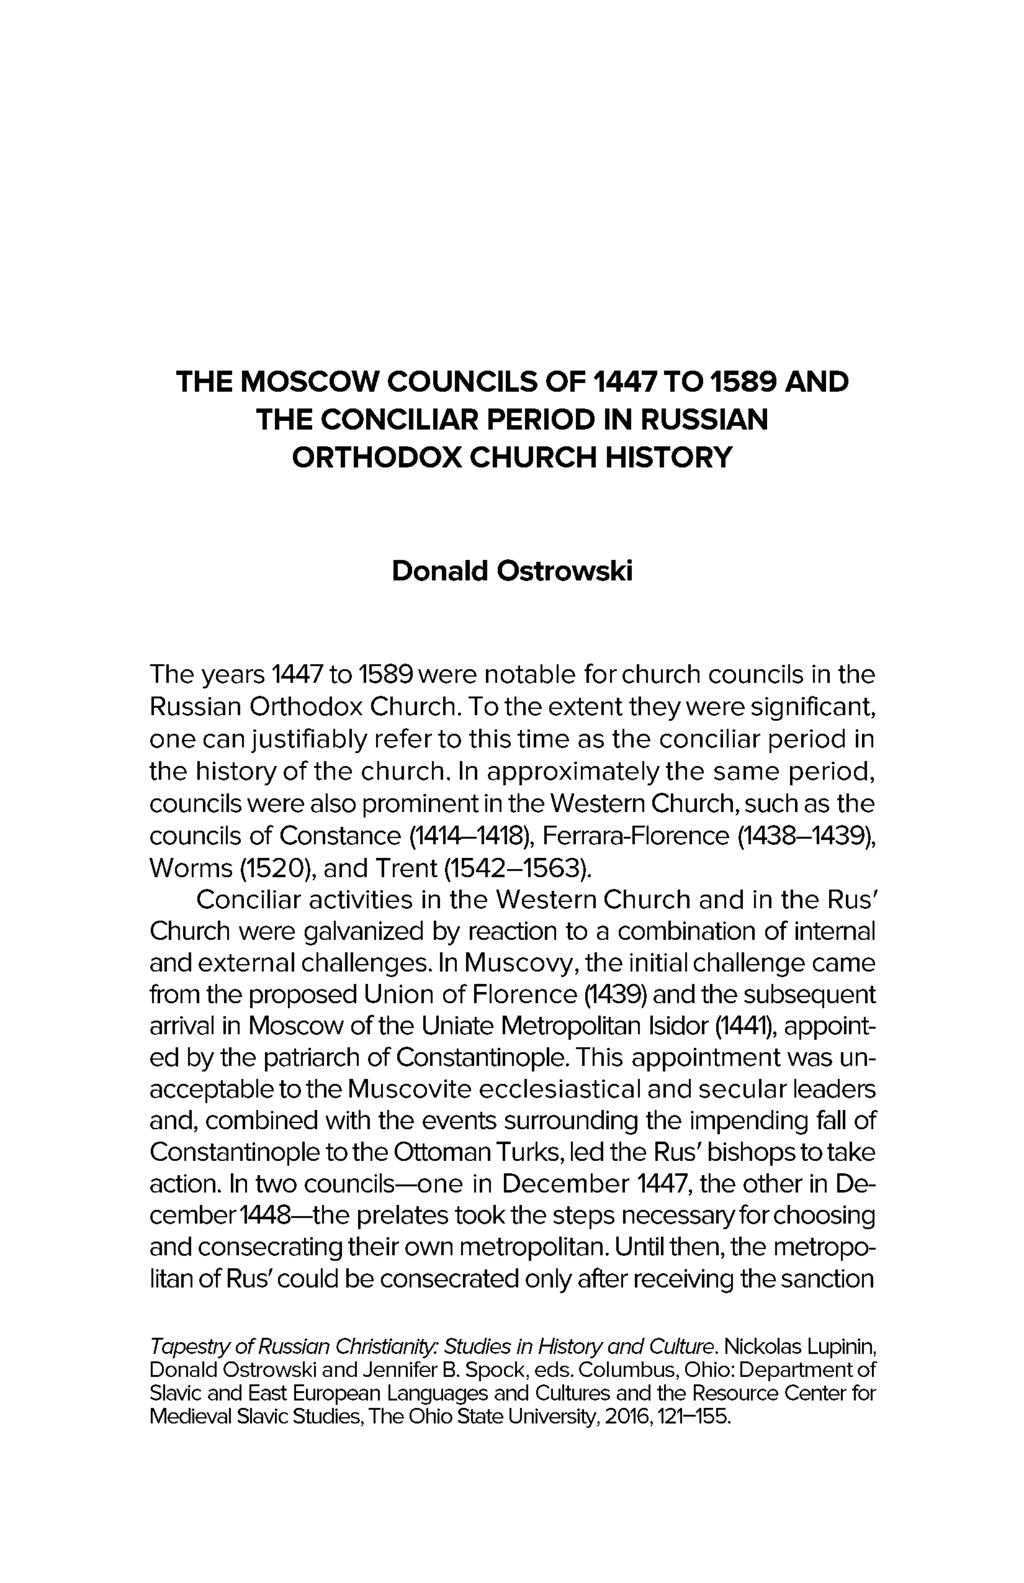 THE MOSCOW COUNCILS OF 1447 T 0 1589 AND THE CONCILIAR PERIOD IN RUSSIAN ORTHODOX CHURCH HISTORY Donald Ostrowski The years 1447 to 1589 were notable for church councils in the Russian Orthodox